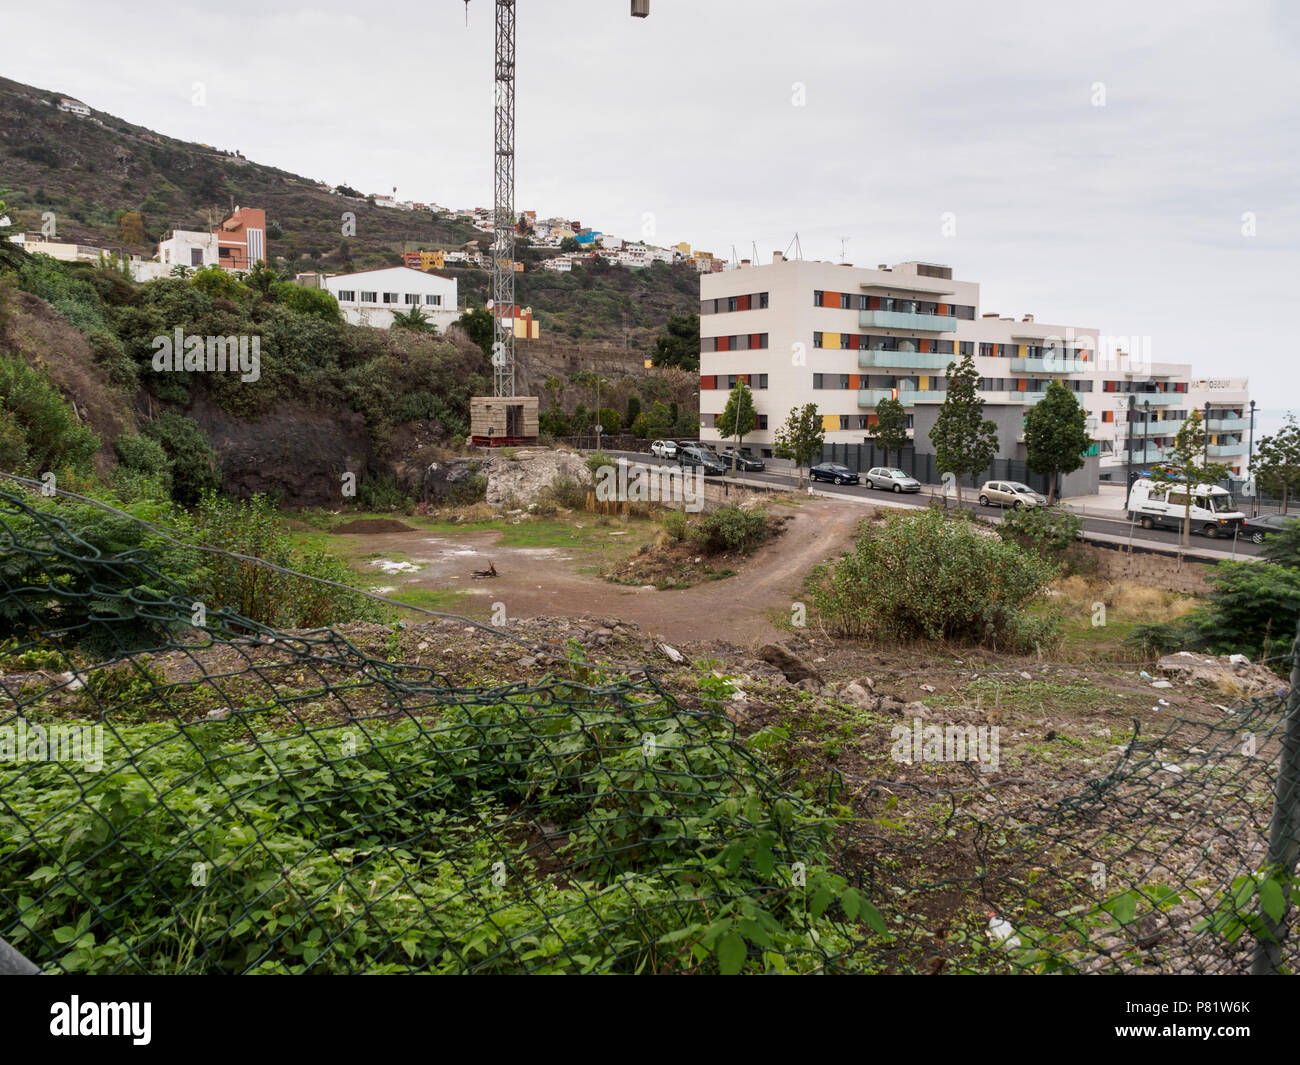 Tenerife, Canary Islands - Icod de los Vinos. Development continues to blight the townwith planning disputes. Stock Photo